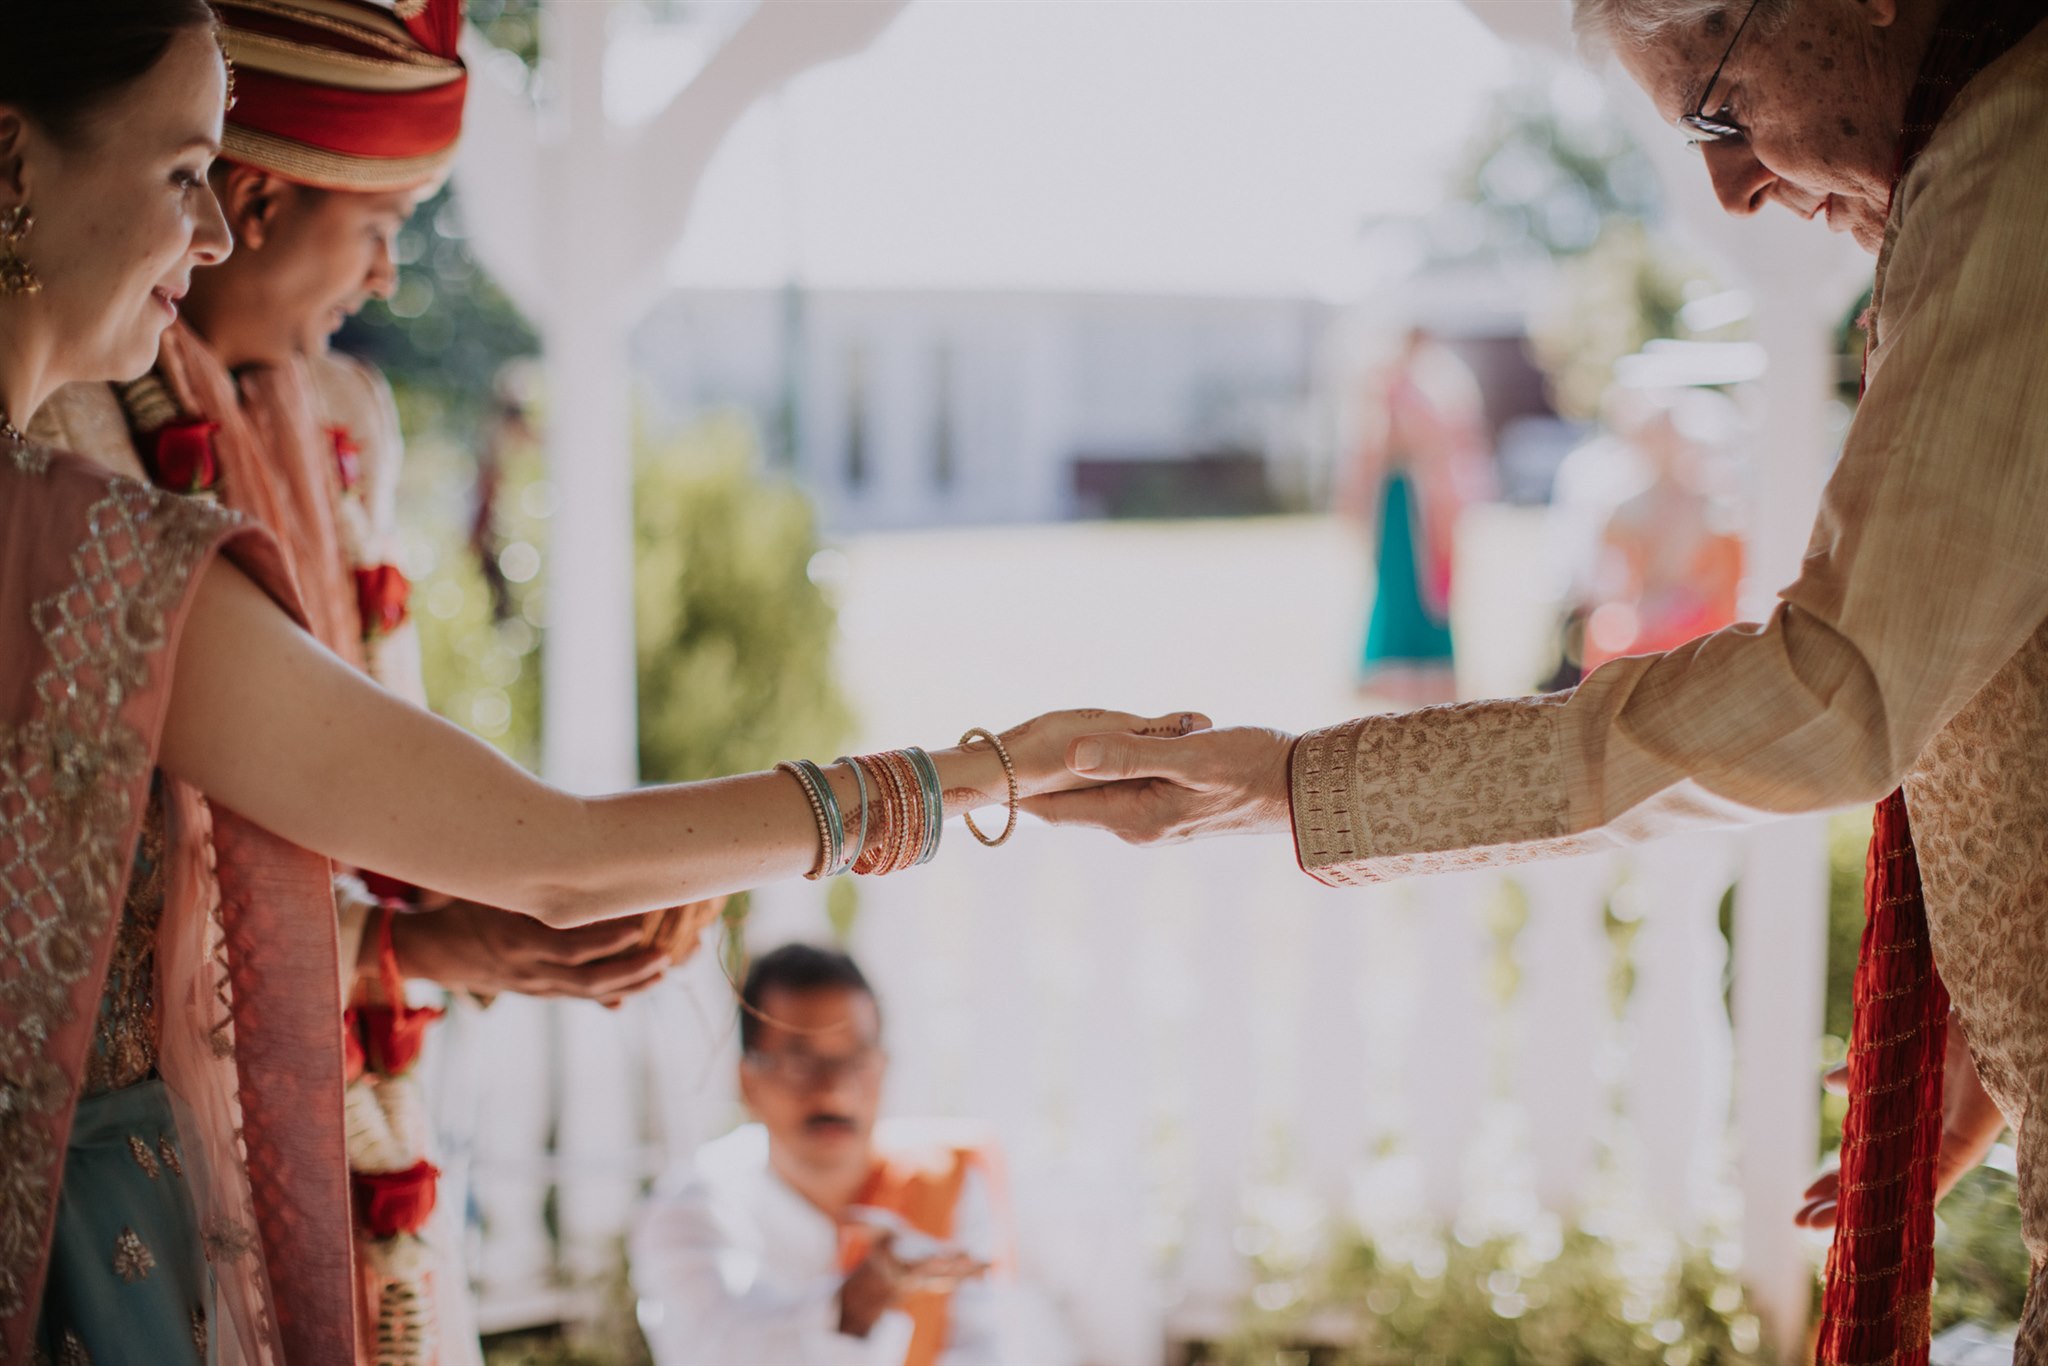 Two persons gently hold hands during a wedding ceremony. Photo by The Commoneer.